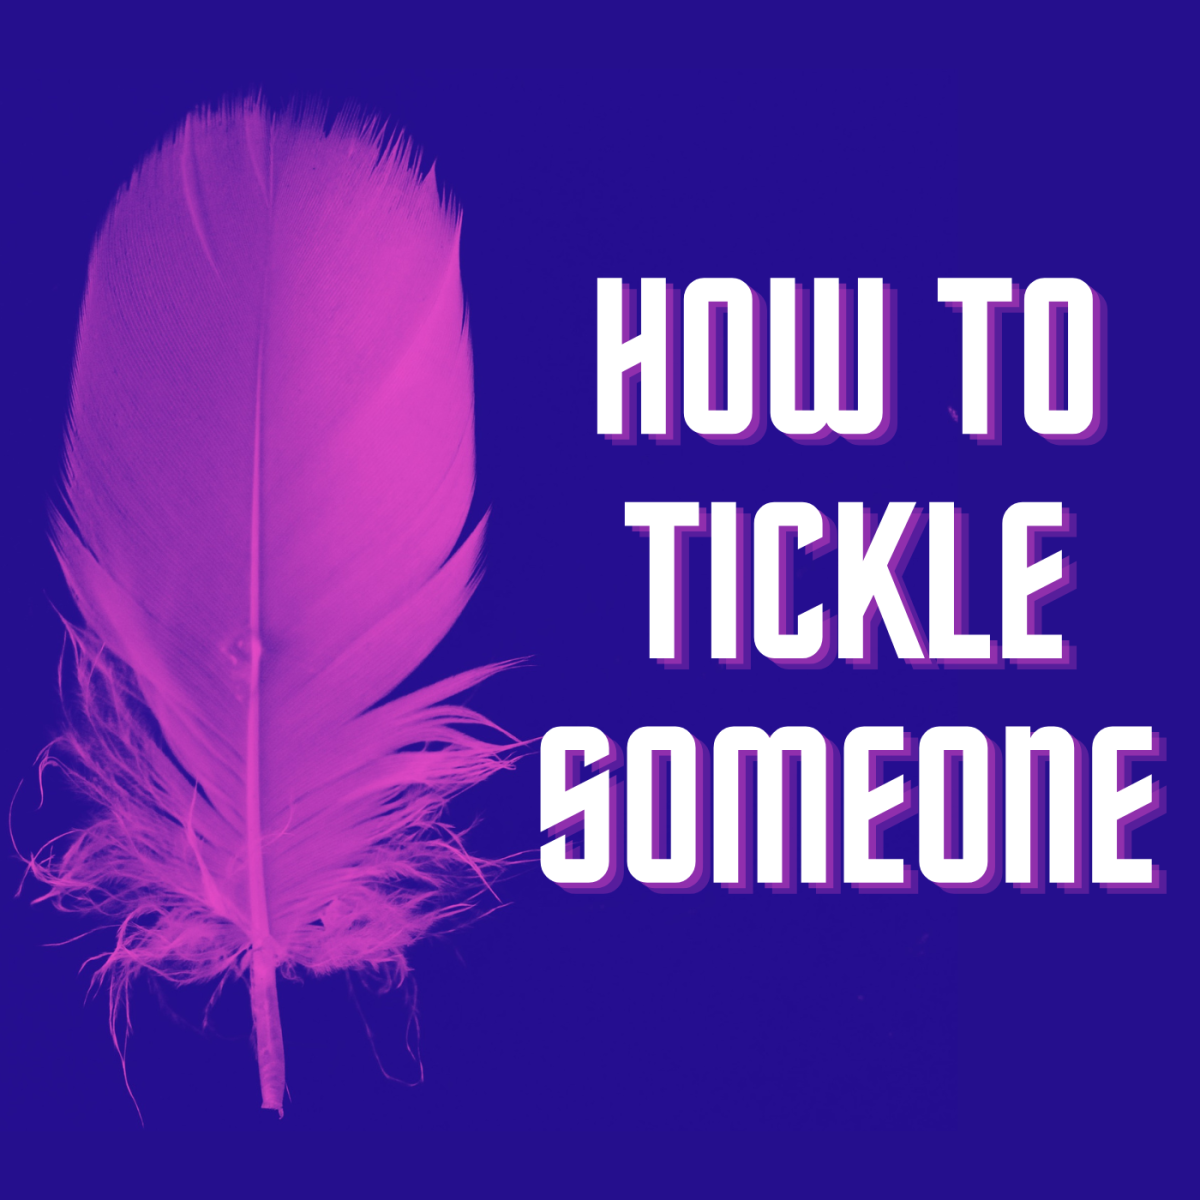 Tickle Tied Girl